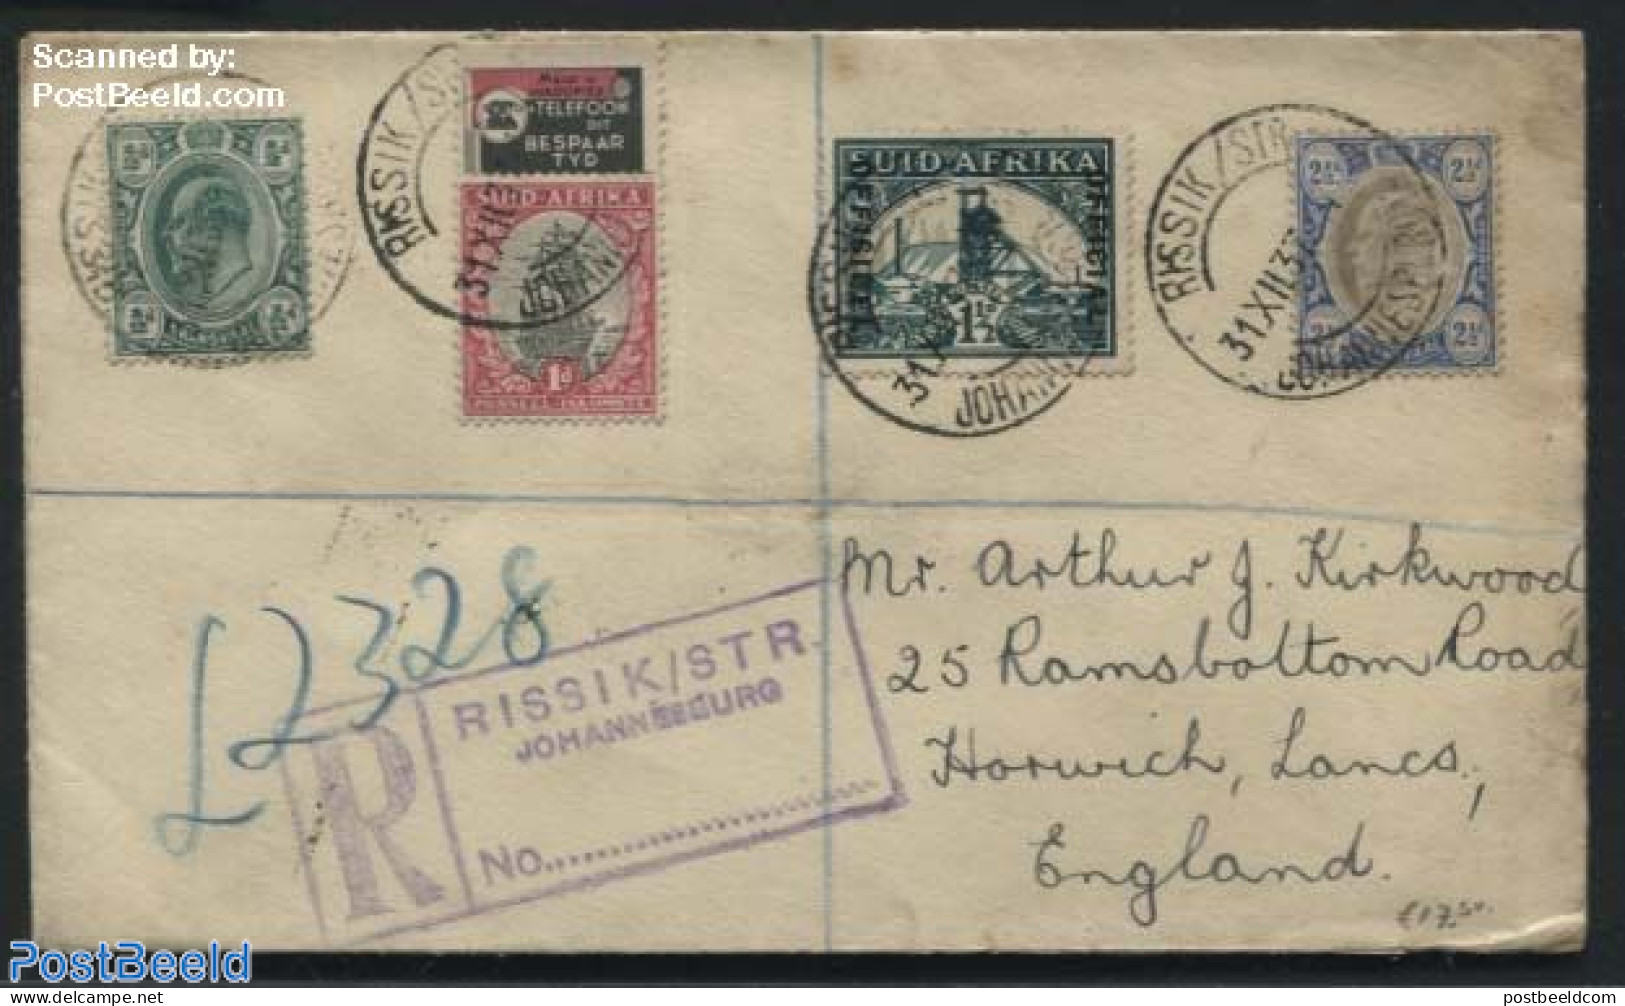 South Africa 1937 Registered Letter From Johannesburg (Rissik Str) To England, Postal History - Covers & Documents